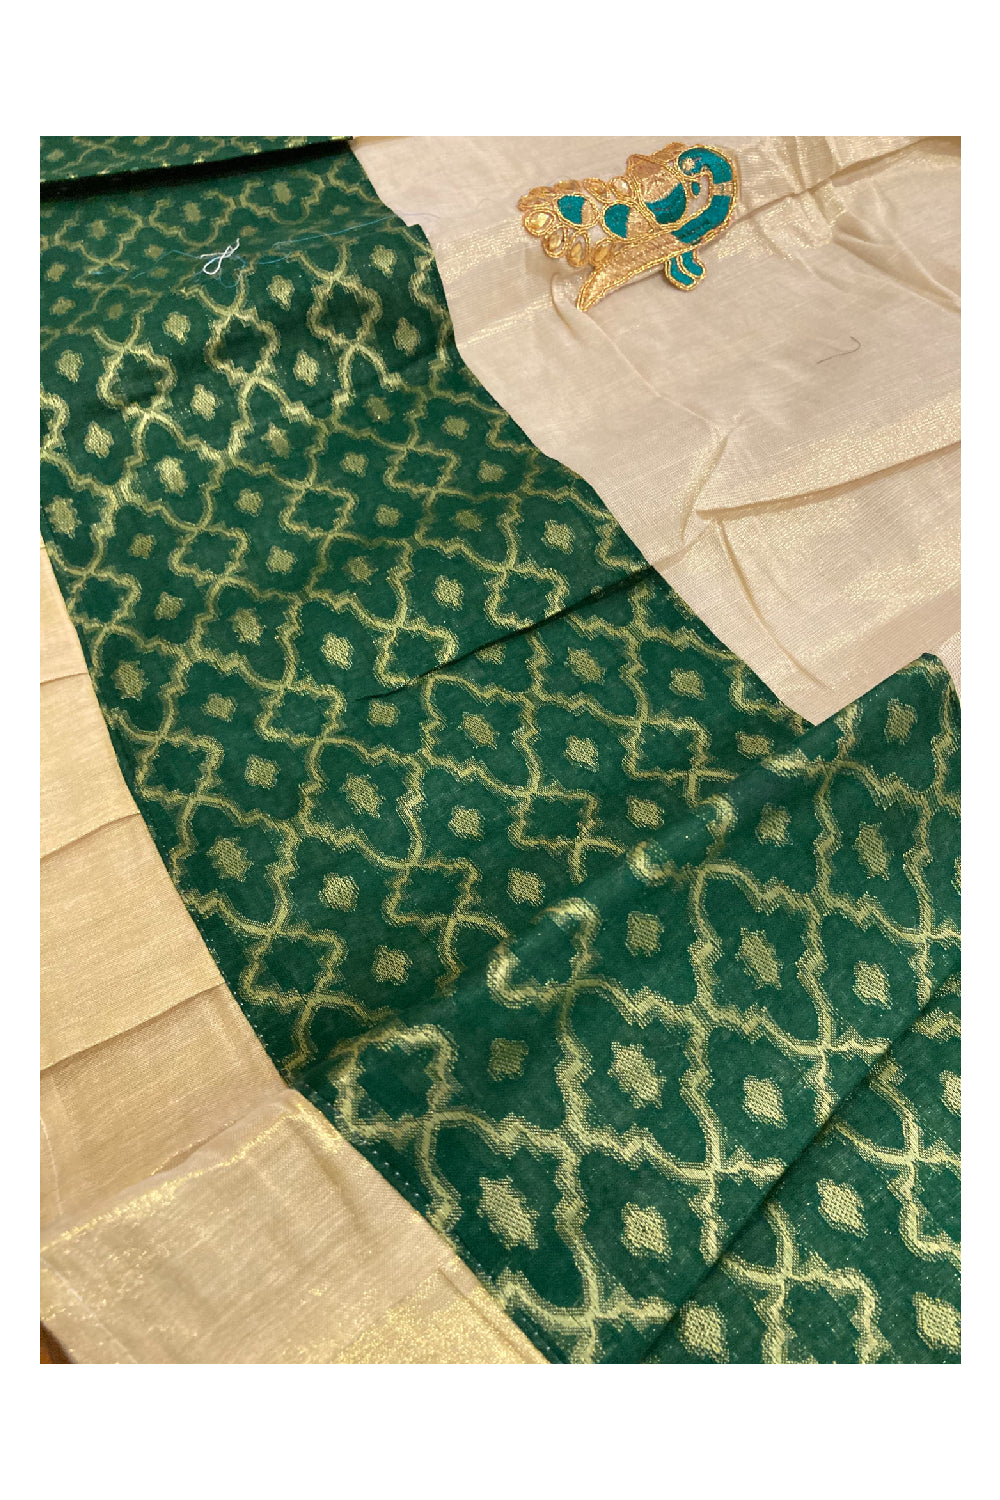 Kerala Tissue Stitched Dhavani Set with Blouse Piece and Neriyathu in with Dark Green Accents